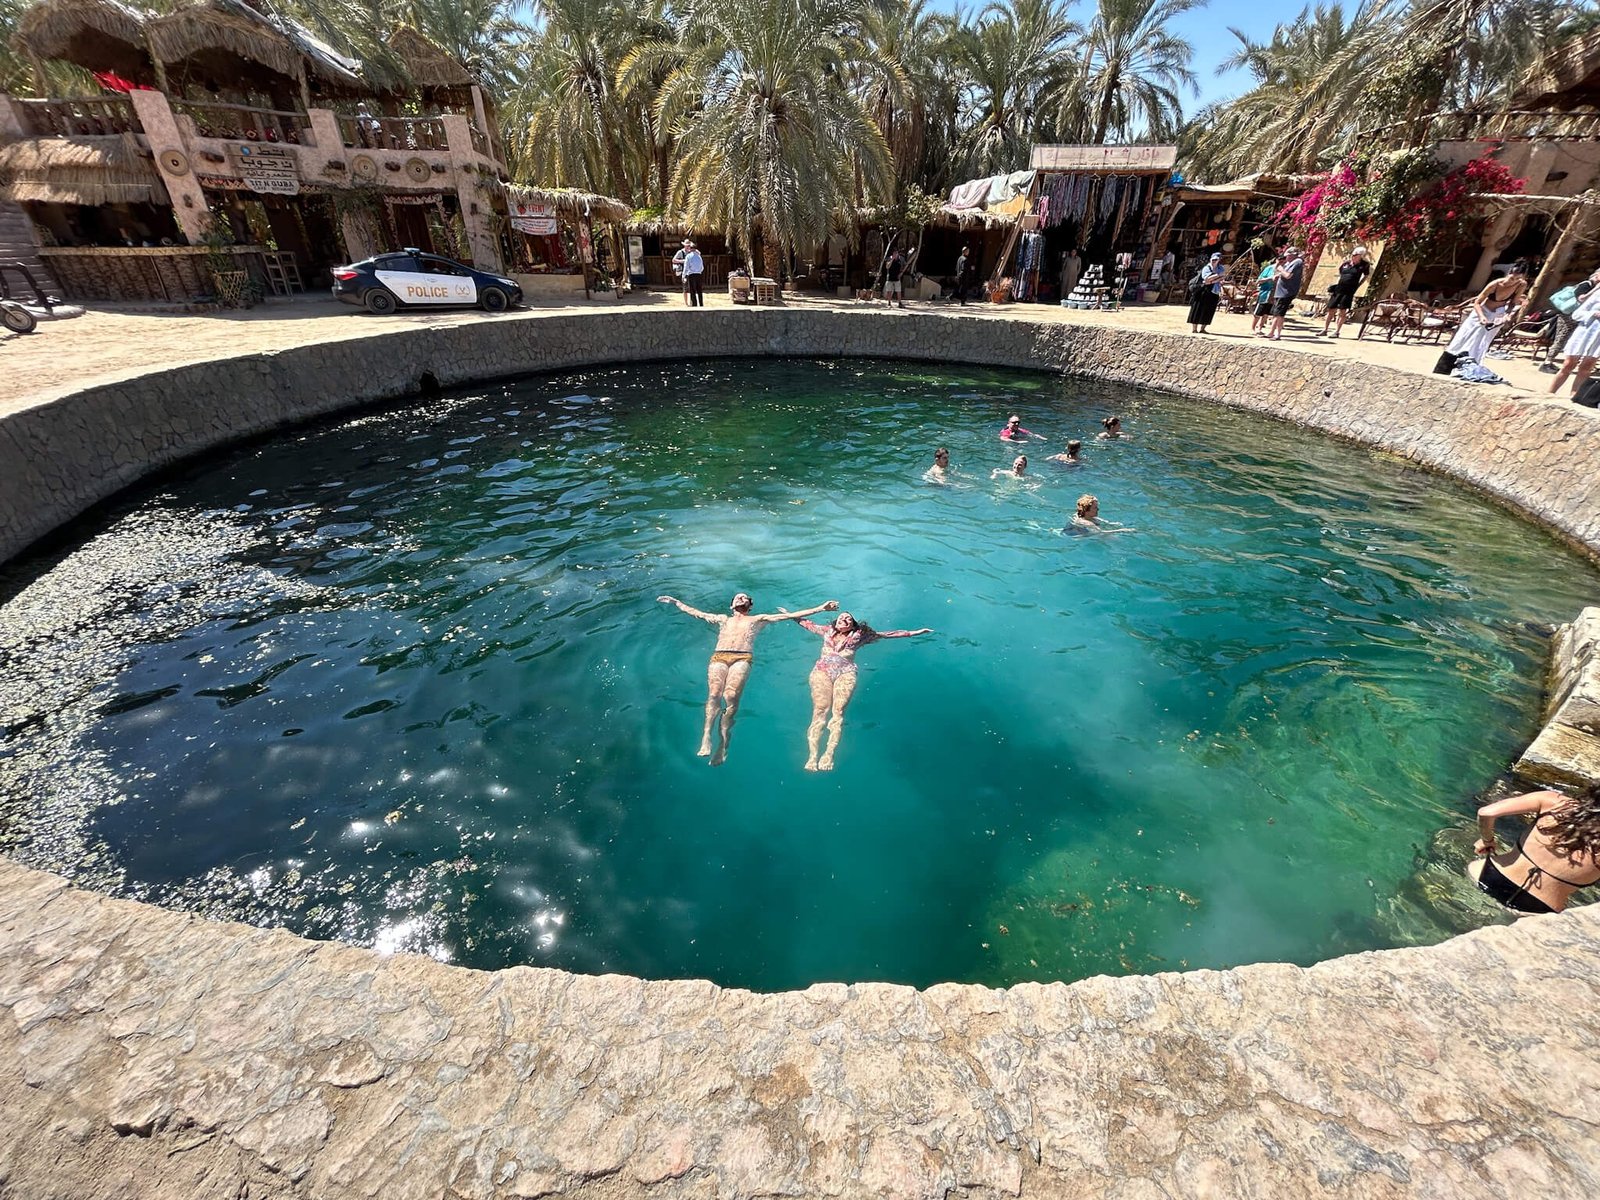 Cleopatra Spring, Siwa Oasis in Egypt